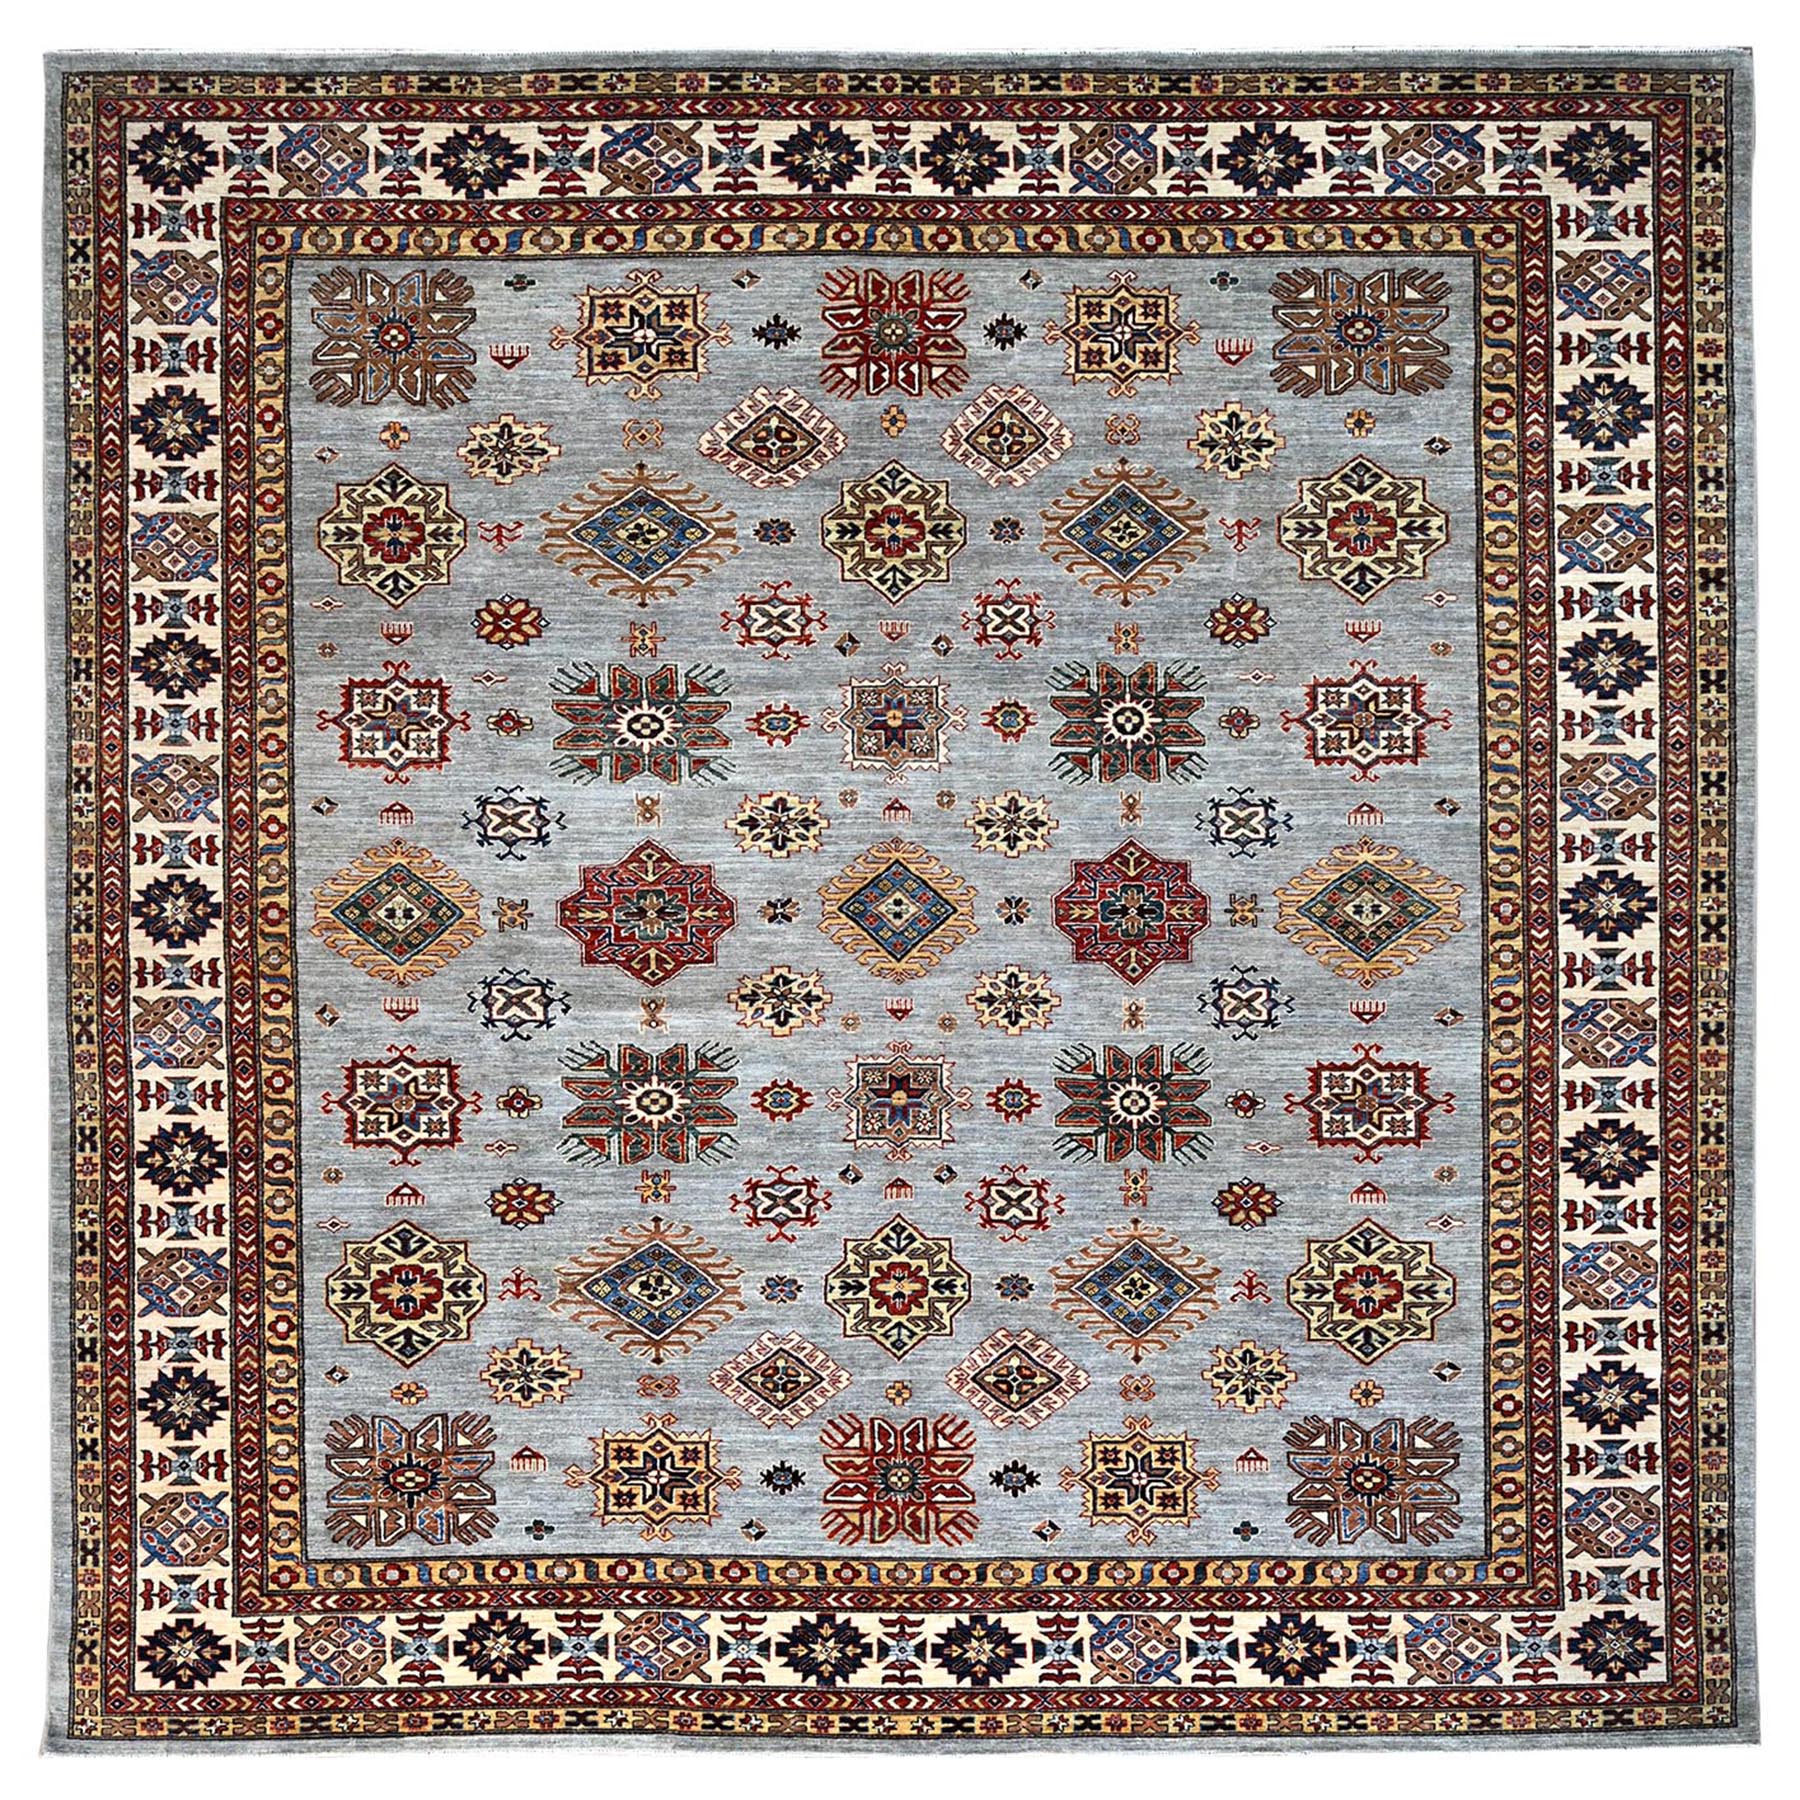 Nimbus Cloud Gray, Afghan Super Kazak with All Over Geometric Motifs, Natural Dyes, Hand Knotted, Organic Wool, Oriental Square Rug 